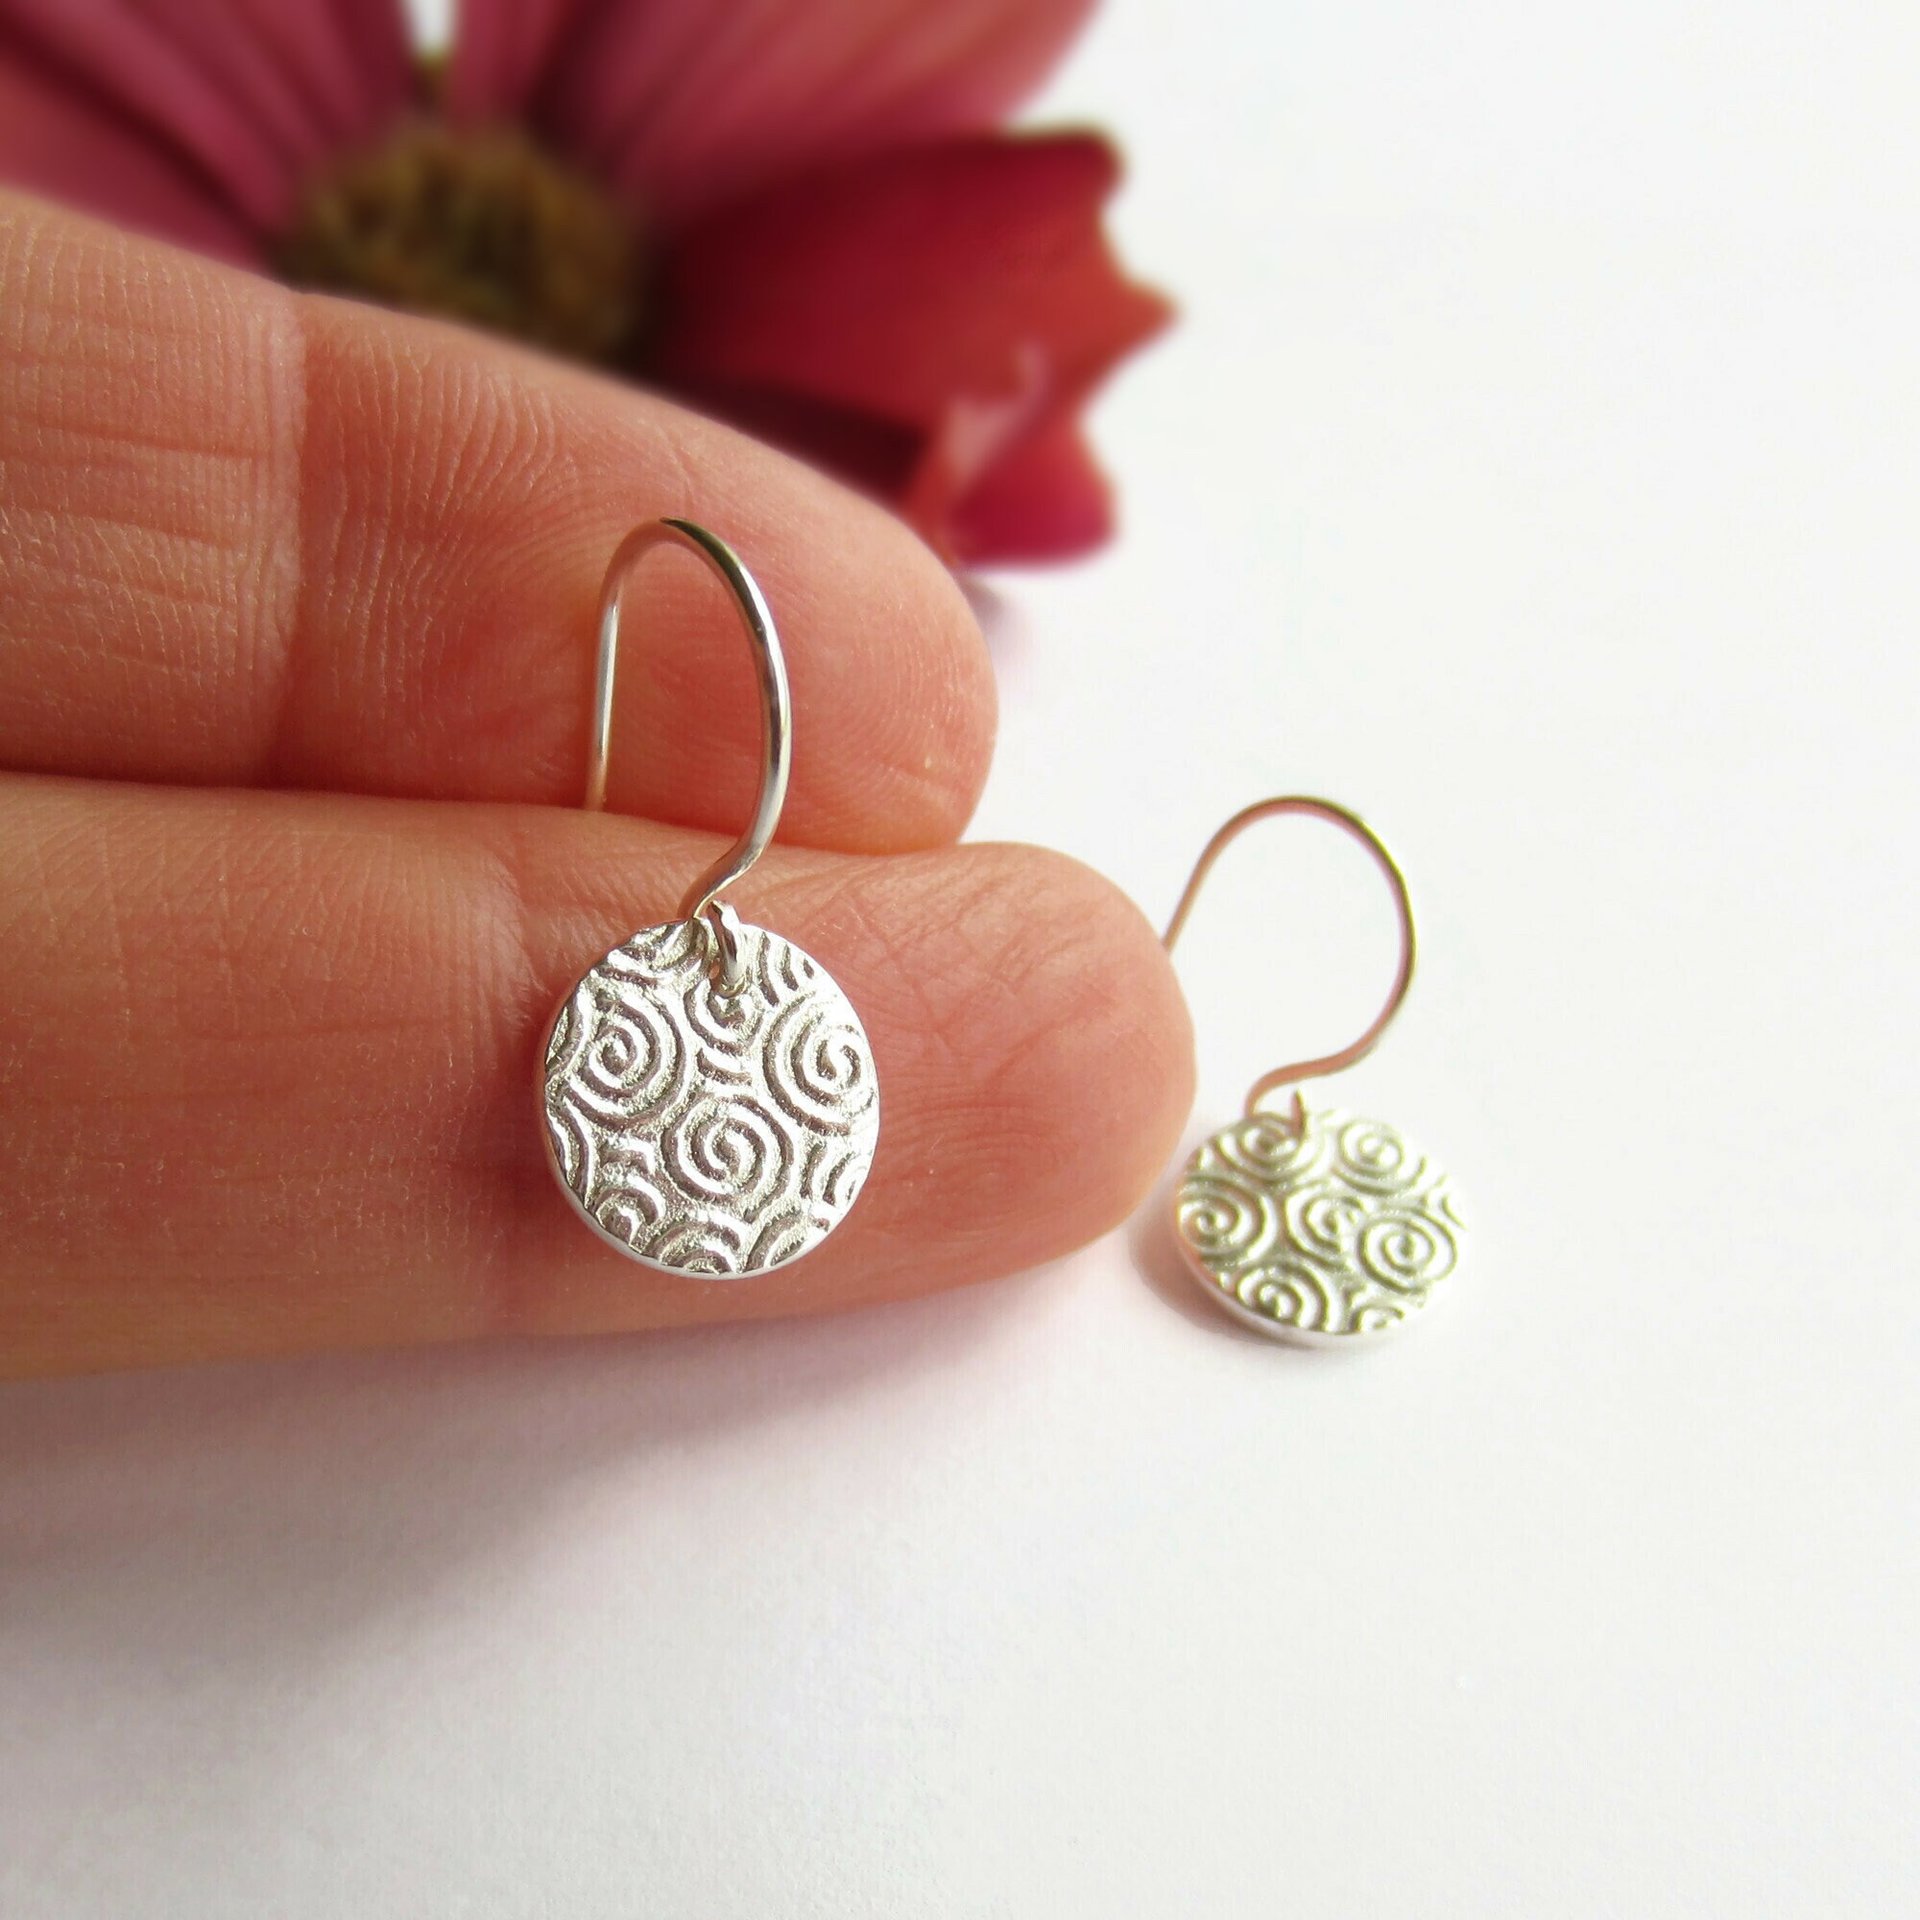 Spiral Patterned Disc Drop Earrings ~ Fine Silver and Sterling Silver ~ Handmade by The Tiny Tree Frog Jewellery